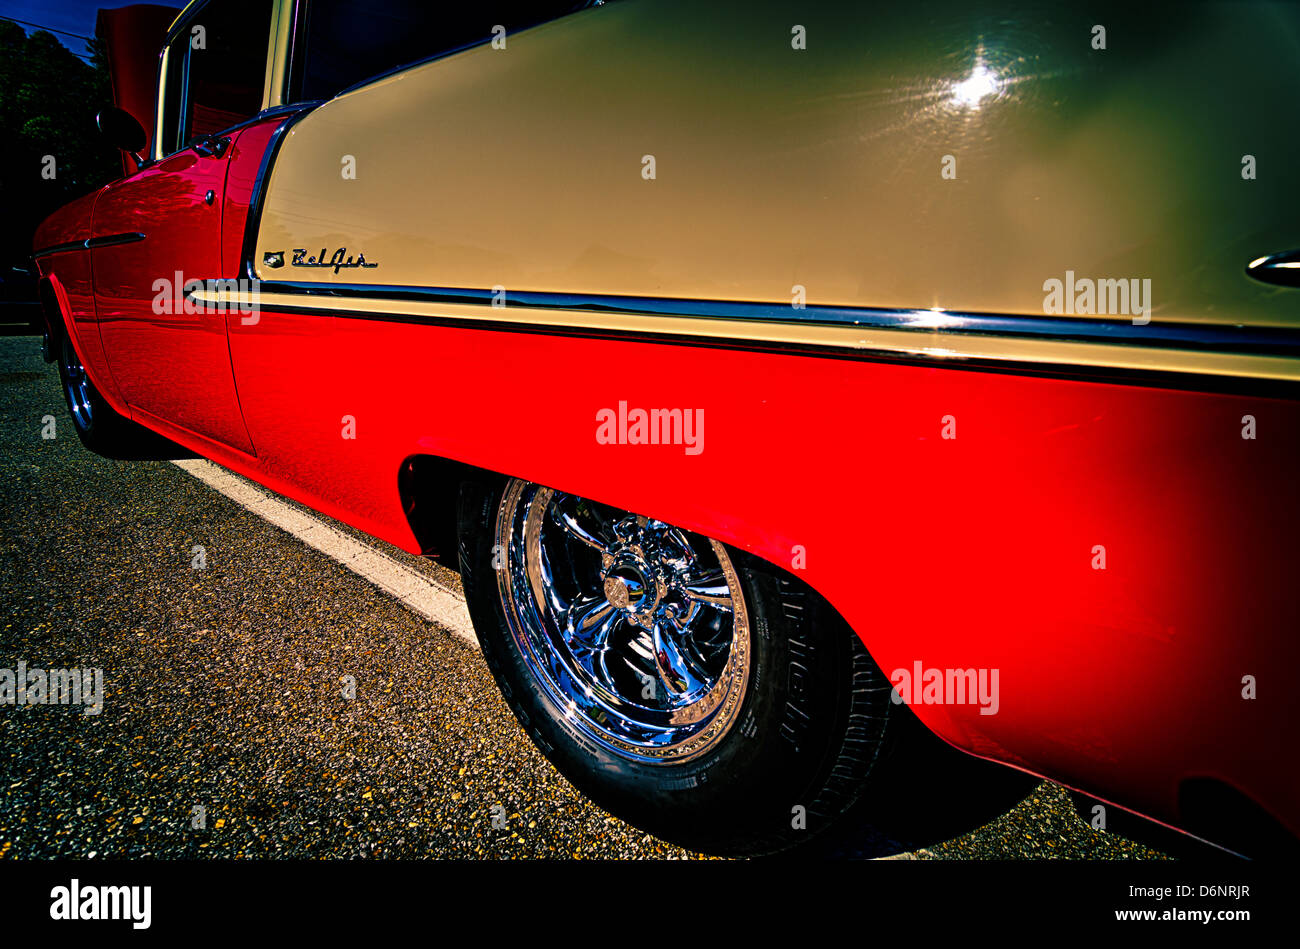 Closeup of side of red vintage Chevy Bel Air car. Stock Photo